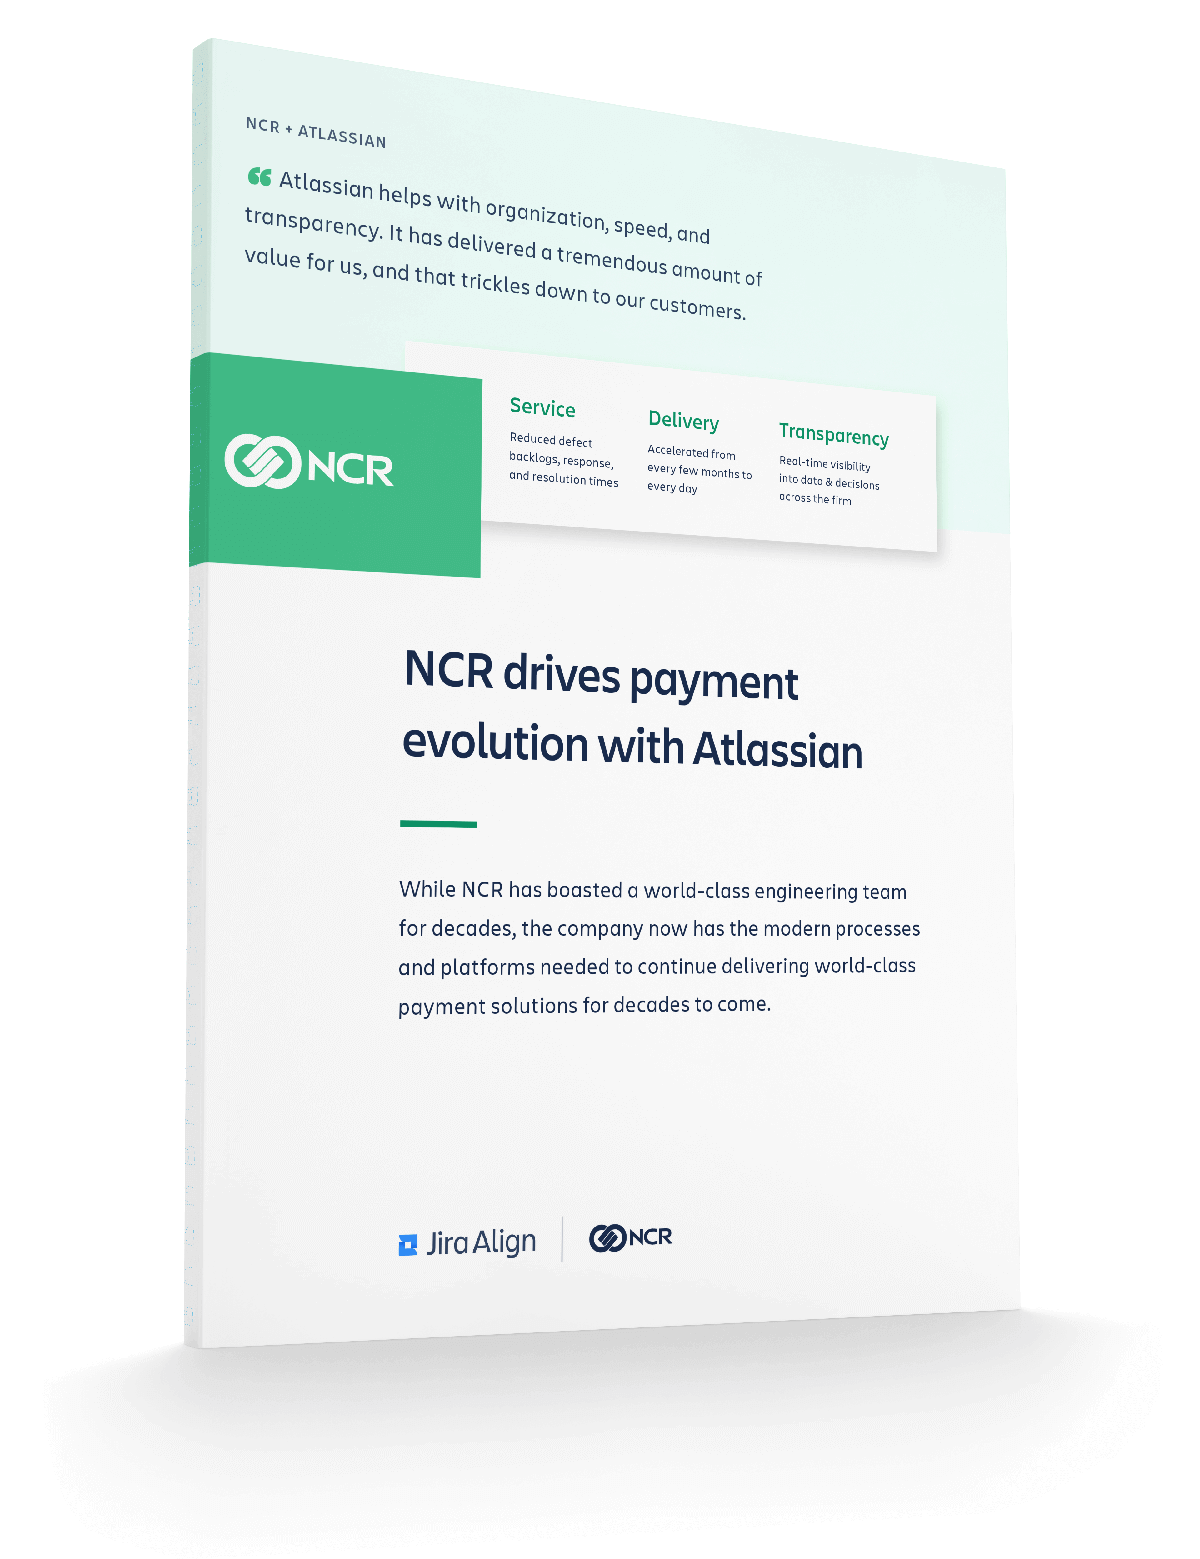 NCR drives payment evolution with scaled agile practices and an integrated Atlassian toolset pdf preview